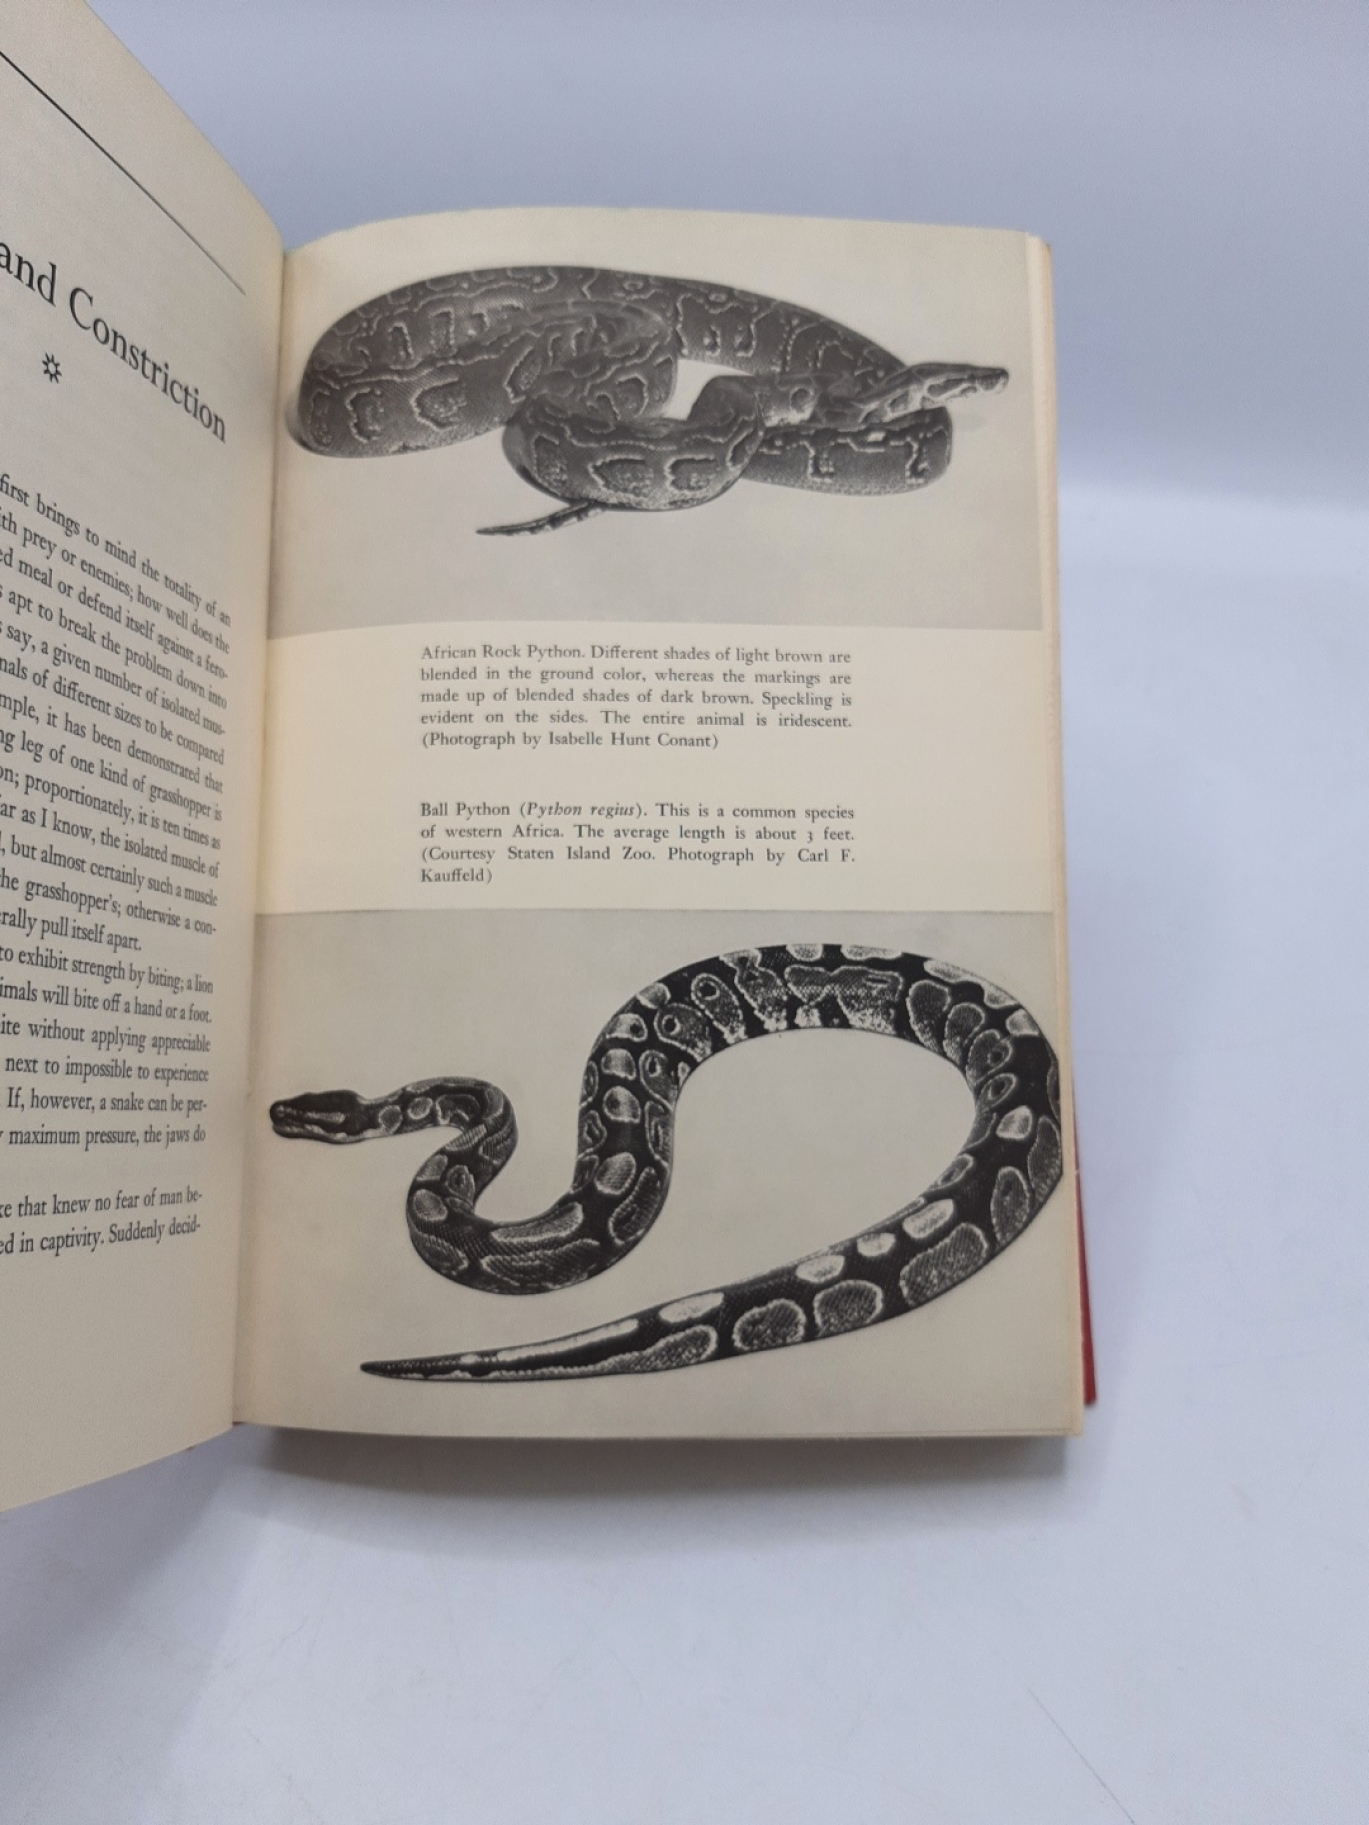 Pope, Clifford H.: The Giant Snakes The Natural History of the Boas Constrictor, the Anaconda and the Largest Pythons